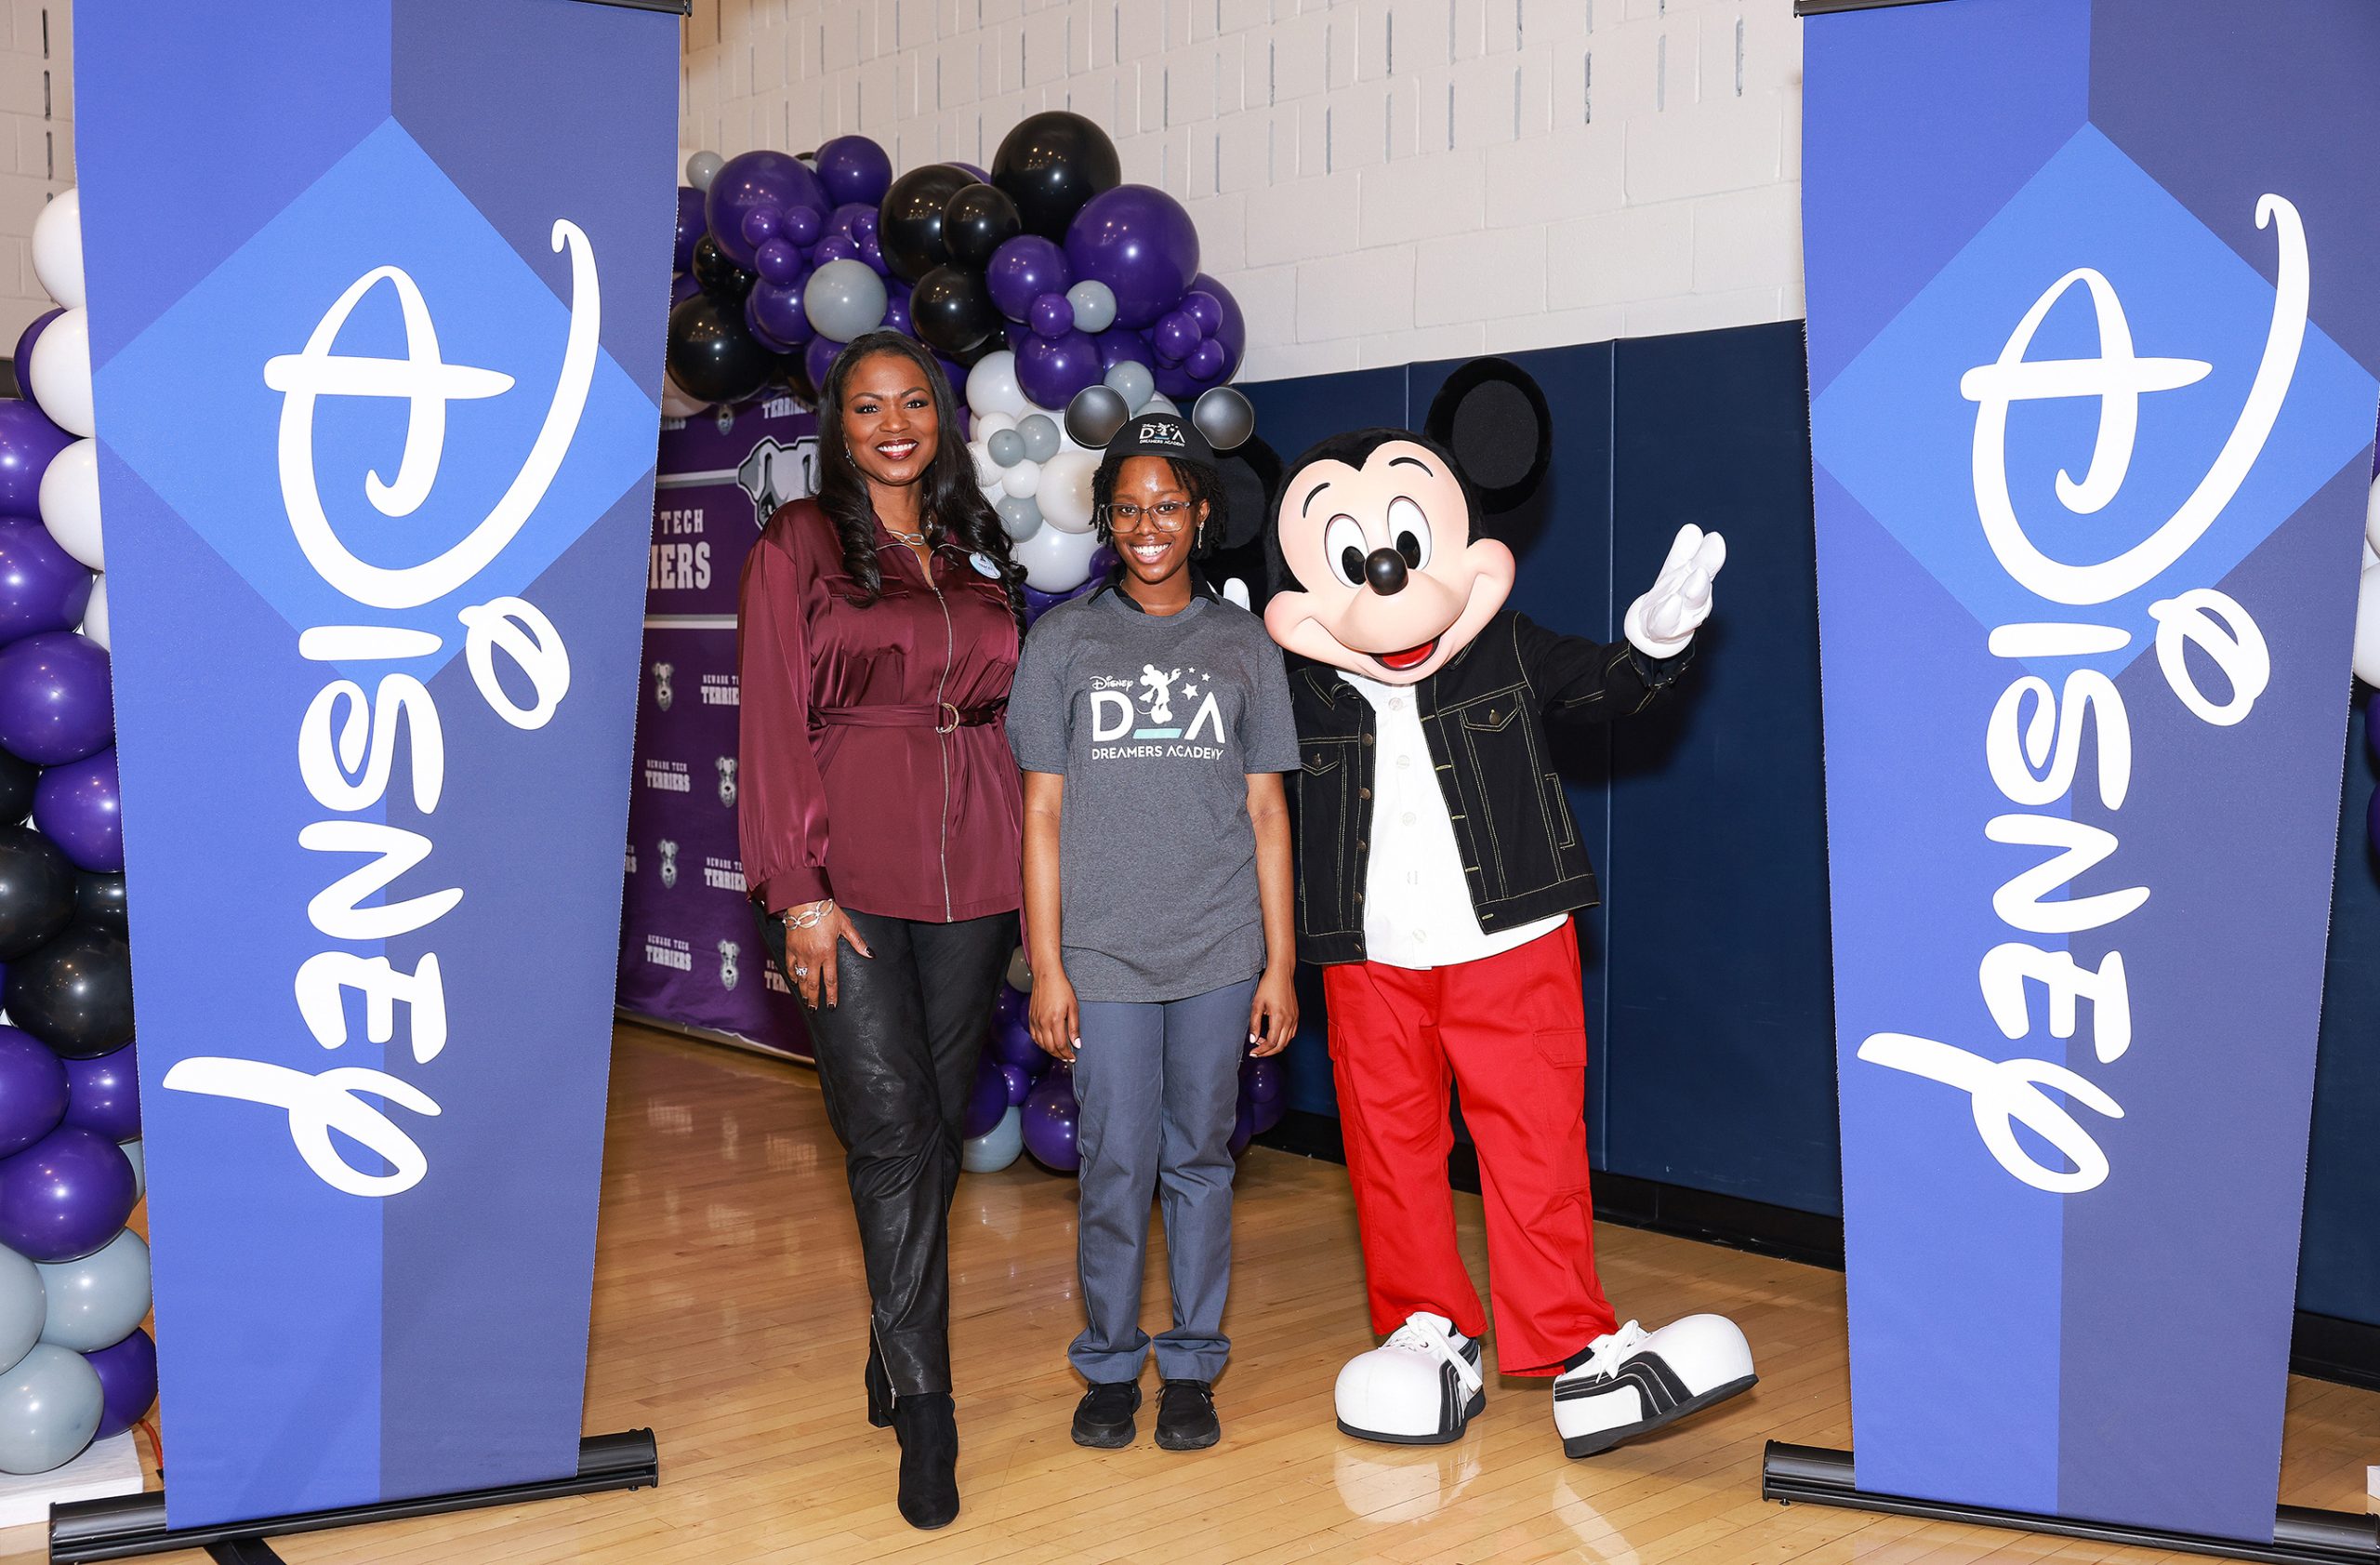 Mickey Mouse and Disney Dreamers Academy executive champion Tracey Powell pose with Newark Tech (N.J.) high school student Mosope Aina moments after she was surprised on national TV on January 13, 2023 with the news that she is one of 100 students selected for this year’s Disney Dreamers Academy at Walt Disney World Resort in Florida in March. Also, the names of all 100 Dreamers were displayed on a Times Square billboard. Disney Dreamers Academy is a mentoring program hosted annually at Walt Disney World Resort to foster the dreams of Black students and teens from underrepresented communities. (ABC/Michael Le Brecht II)